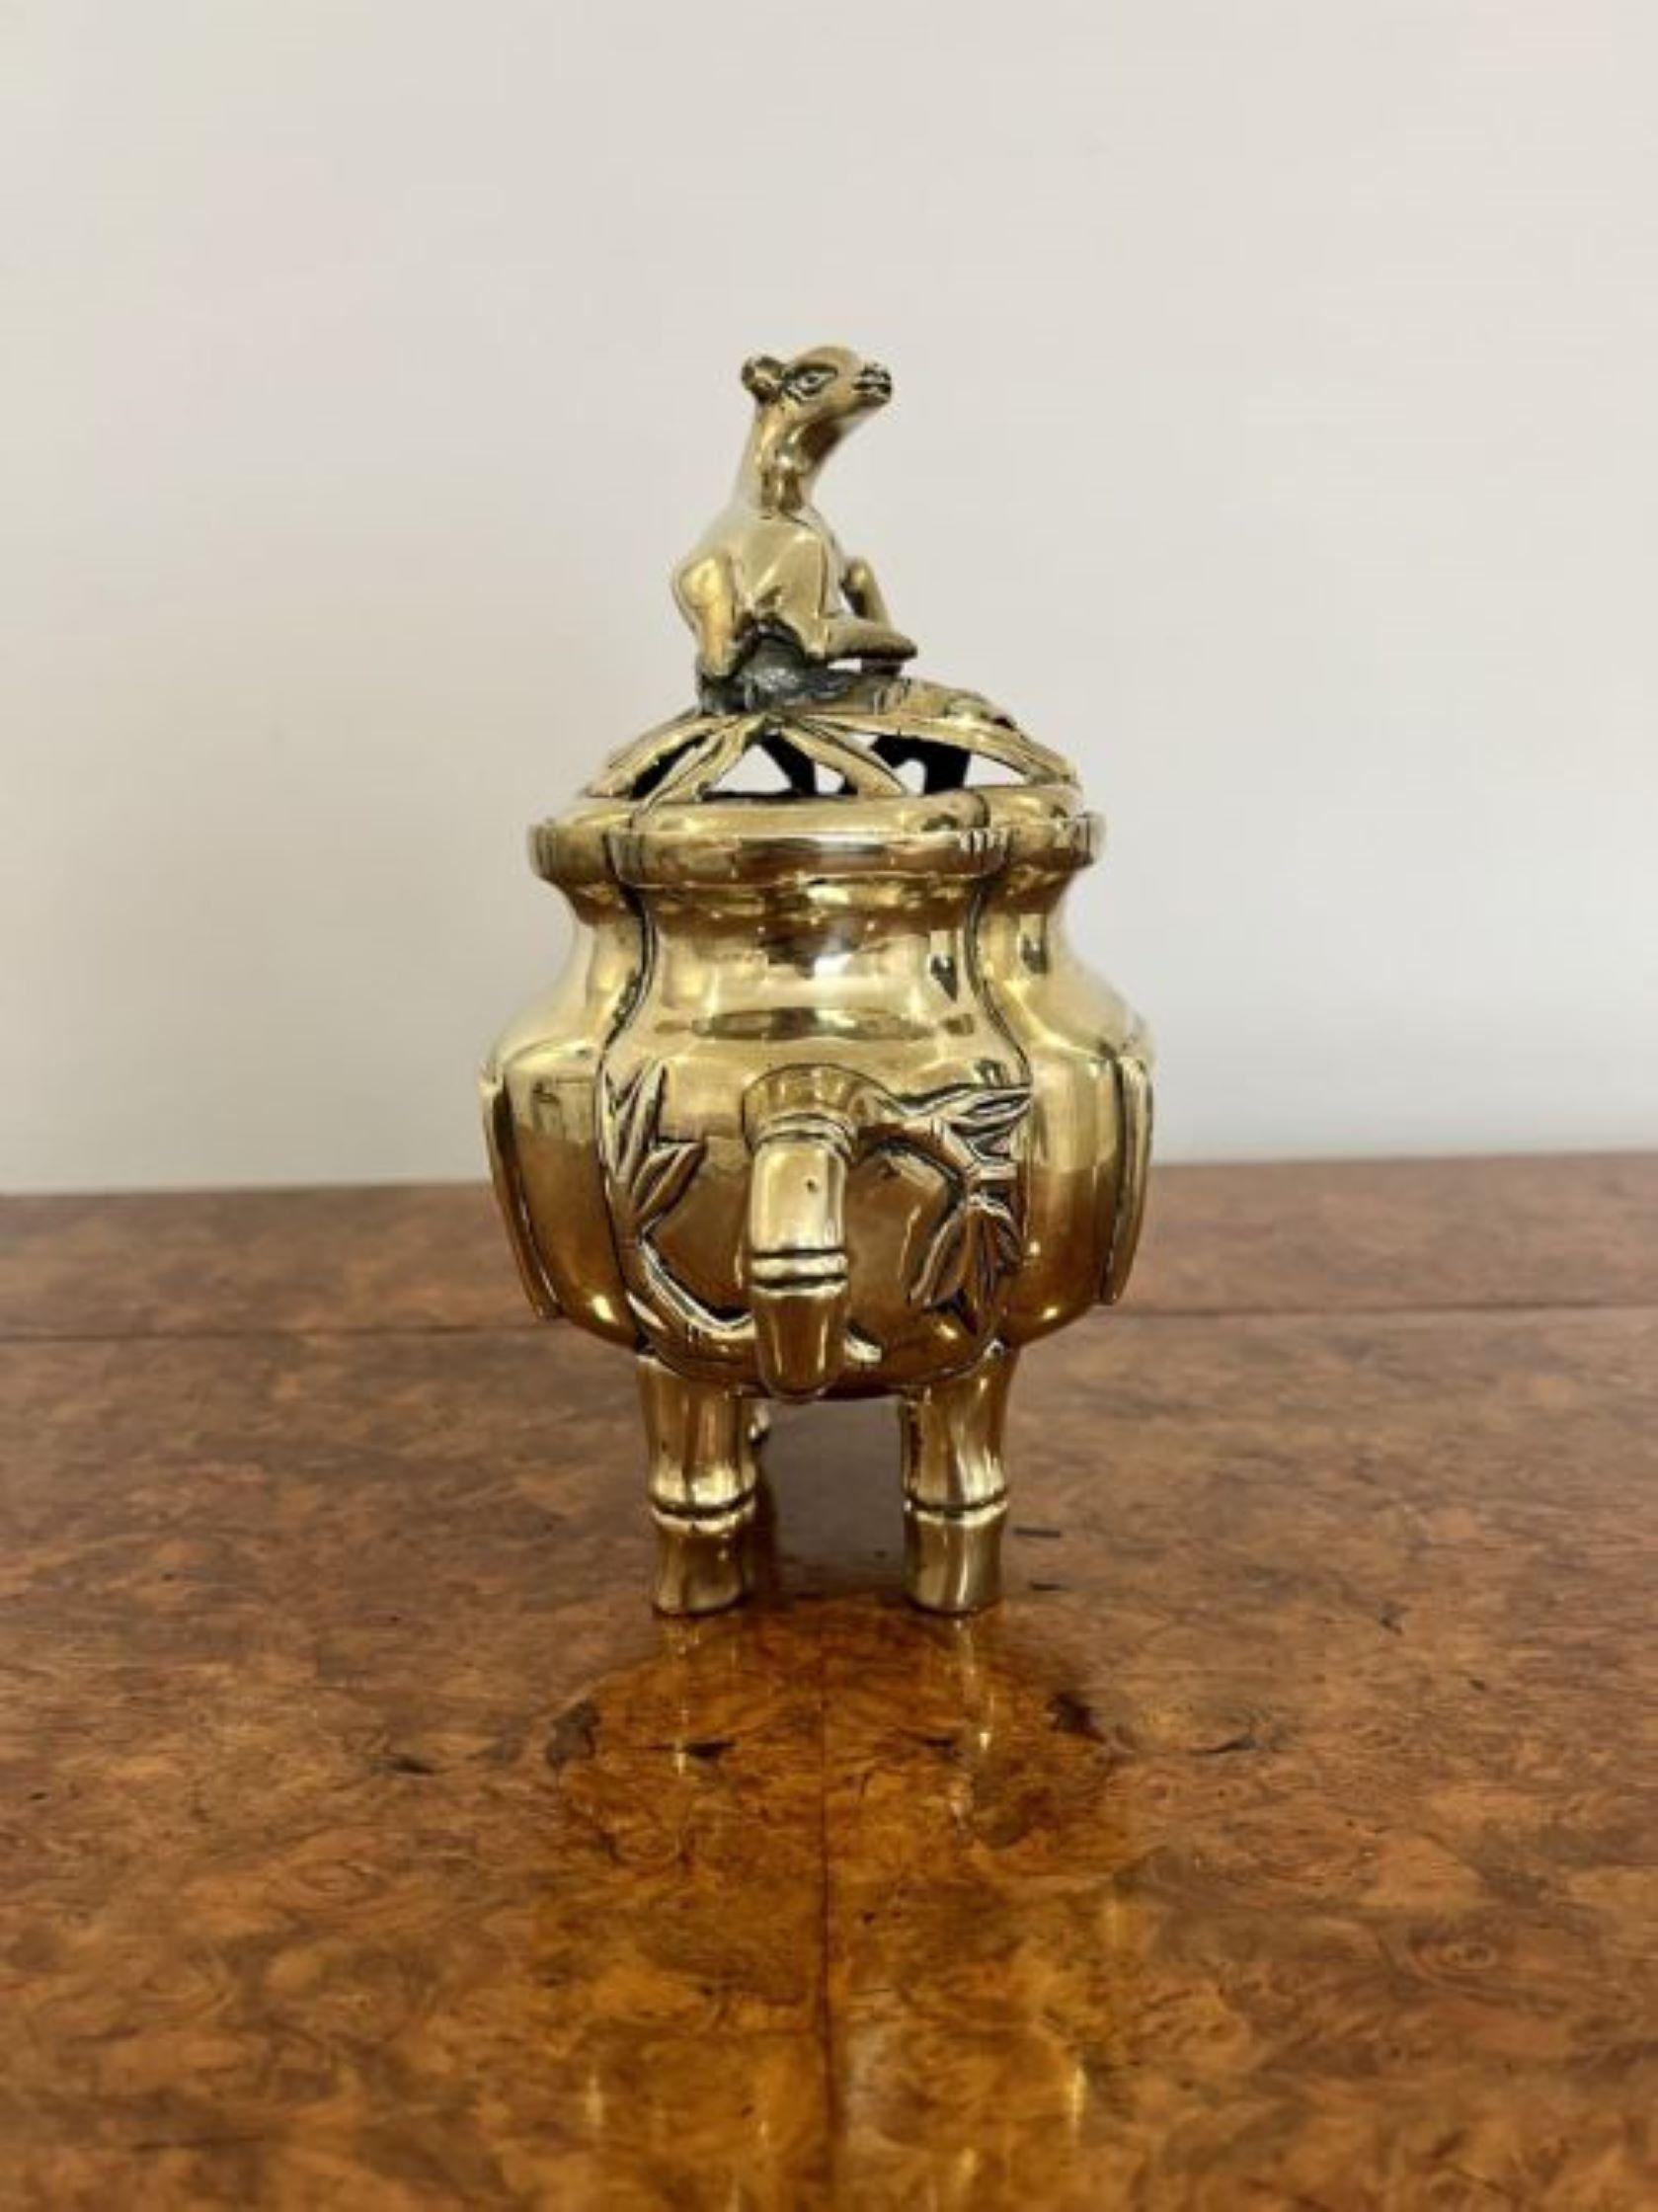 Quality antique brass Chinese lidded incense burner having a quality brass incense burner with a pierced removable lid decorated with a deer, going down the body to two panels having scenes of birds and deers raised on bamboo style feet with two